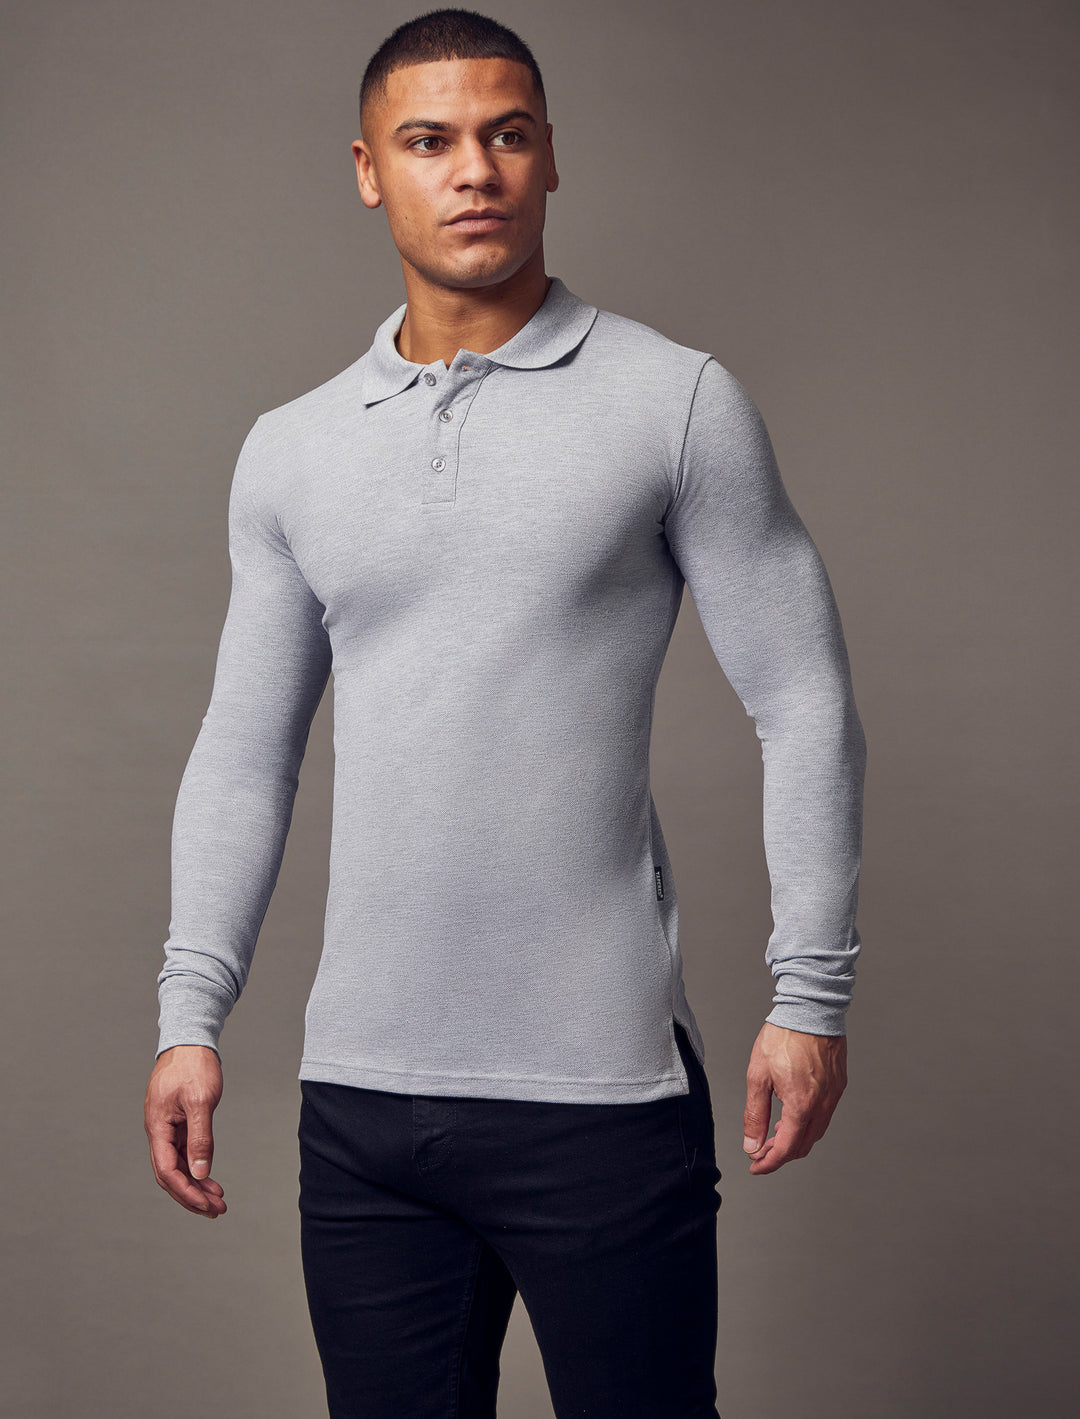 Grey muscle-fit polo shirt from Tapered Menswear, featuring a tapered fit and high-quality fabric, designed for the contemporary man.